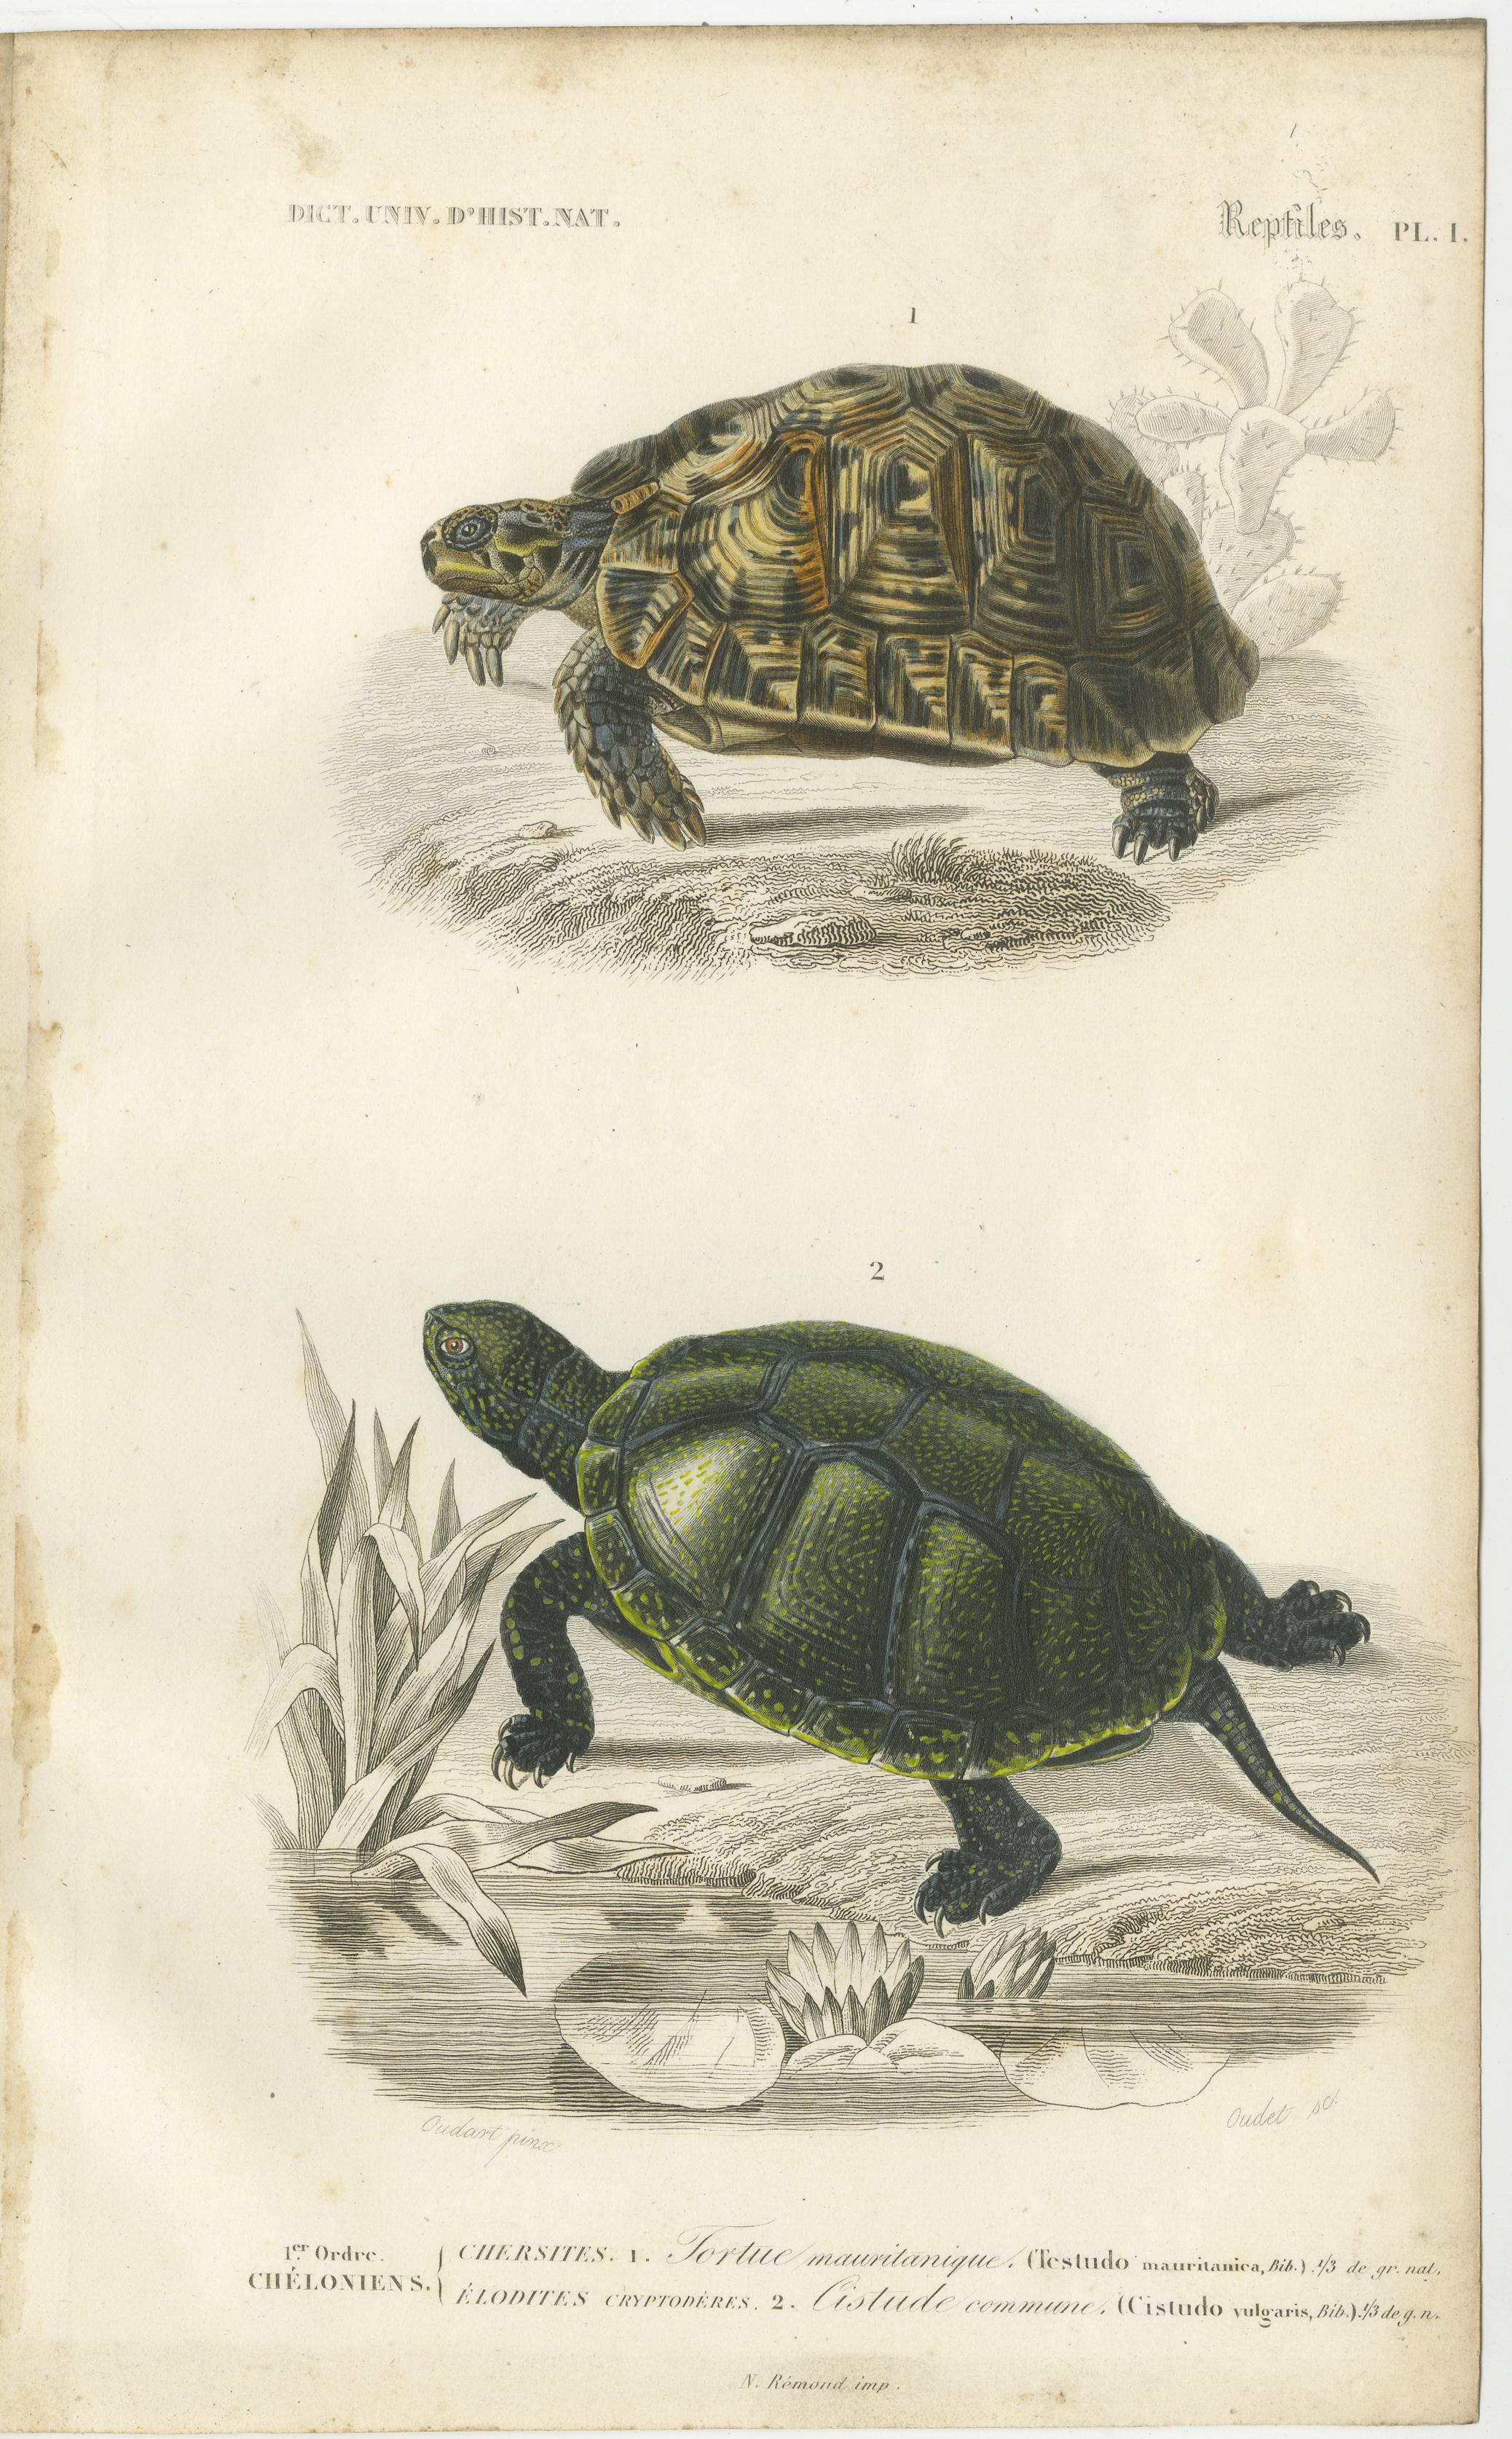 Set of 2 original antique prints of turtles. These prints originate from 'Dictionnaire universel d'Histoire Naturelle' by d'Orbigny. Published 1861. 

Charles Henry Dessalines d'Orbigny was a French botanist and geologist specializing in the